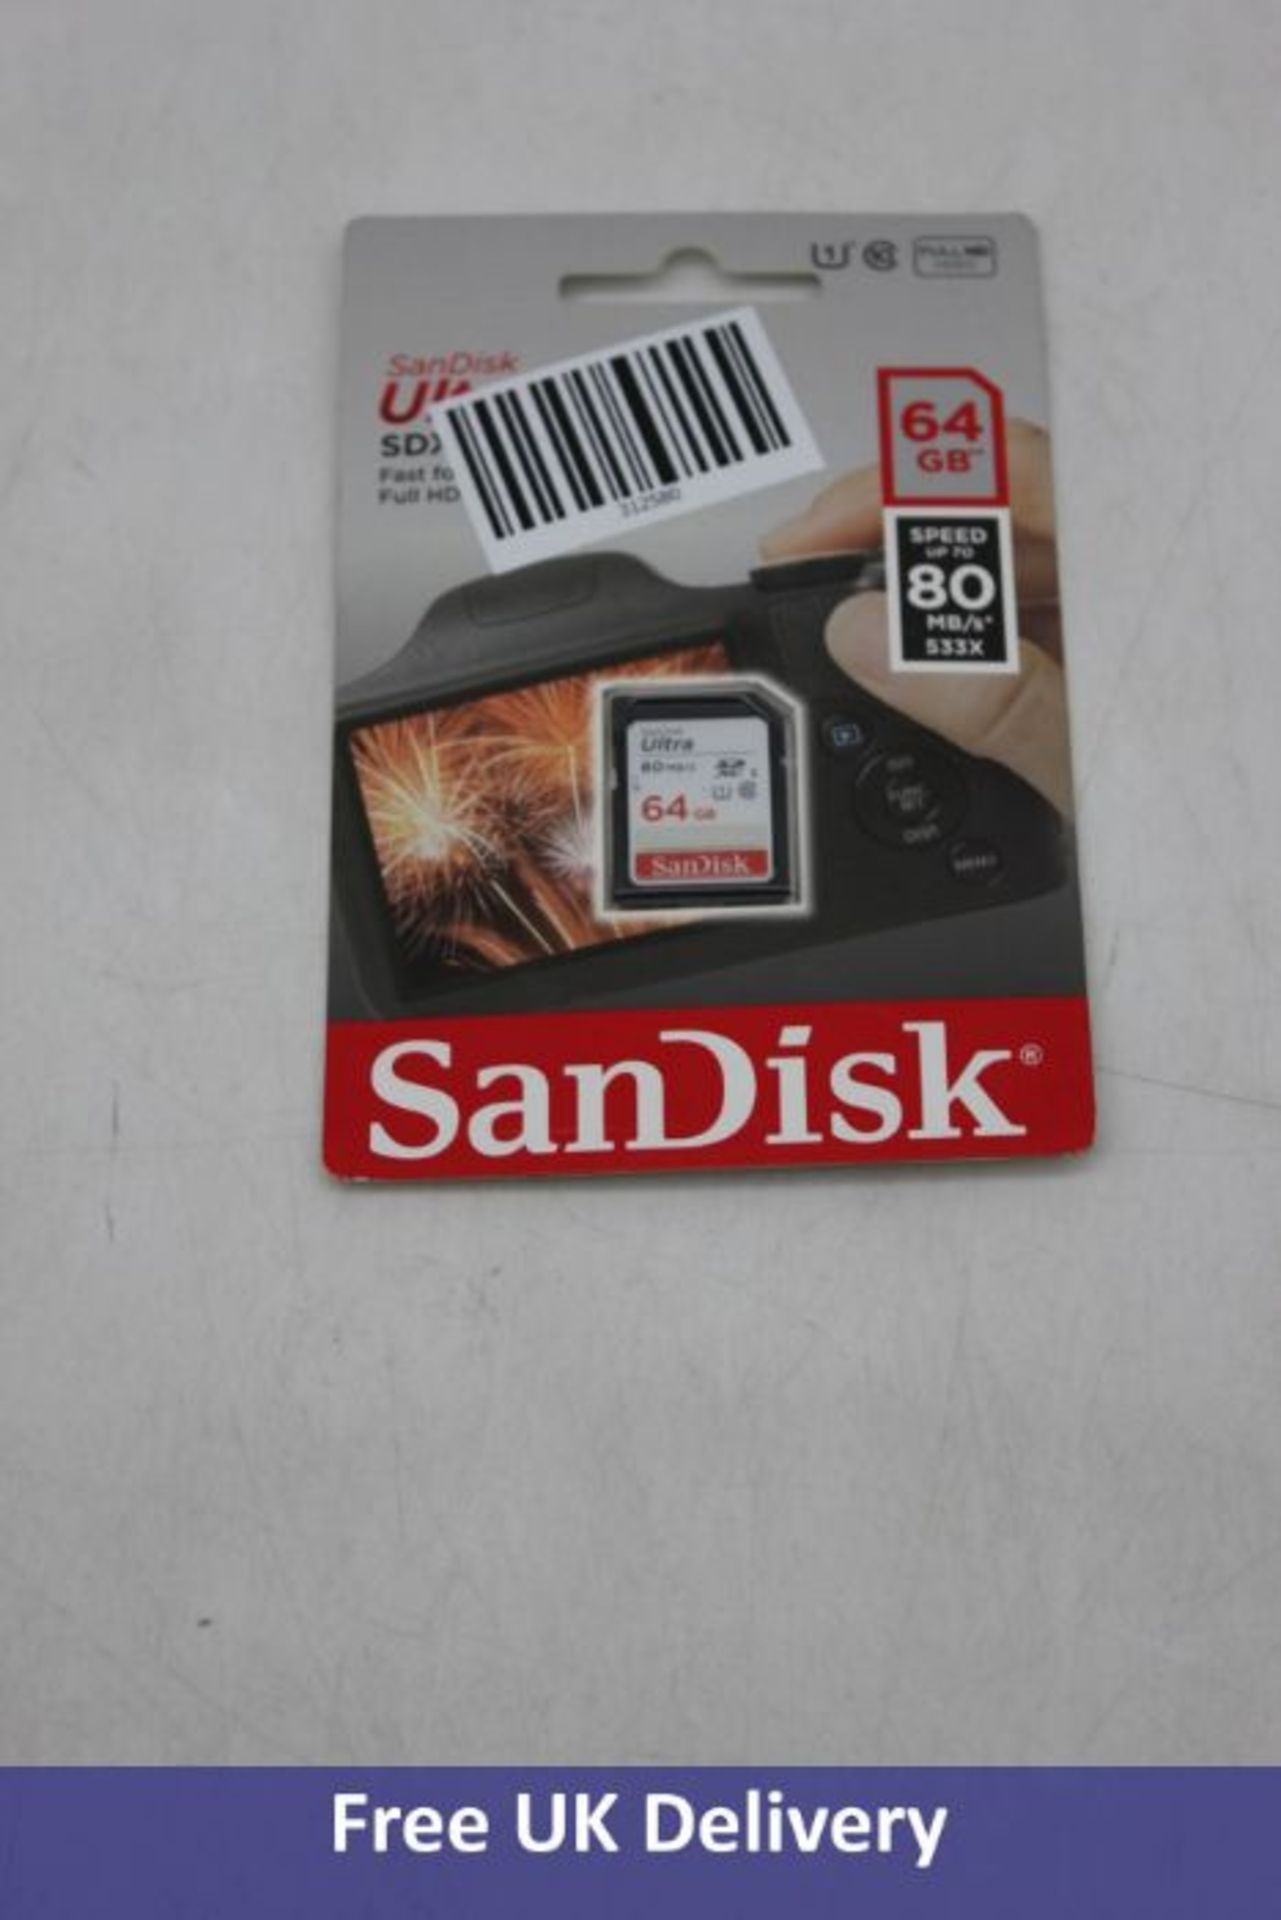 Four SanDisk 64GB Ultra SDXC UHS-1 Memory Cards, 80MB/s